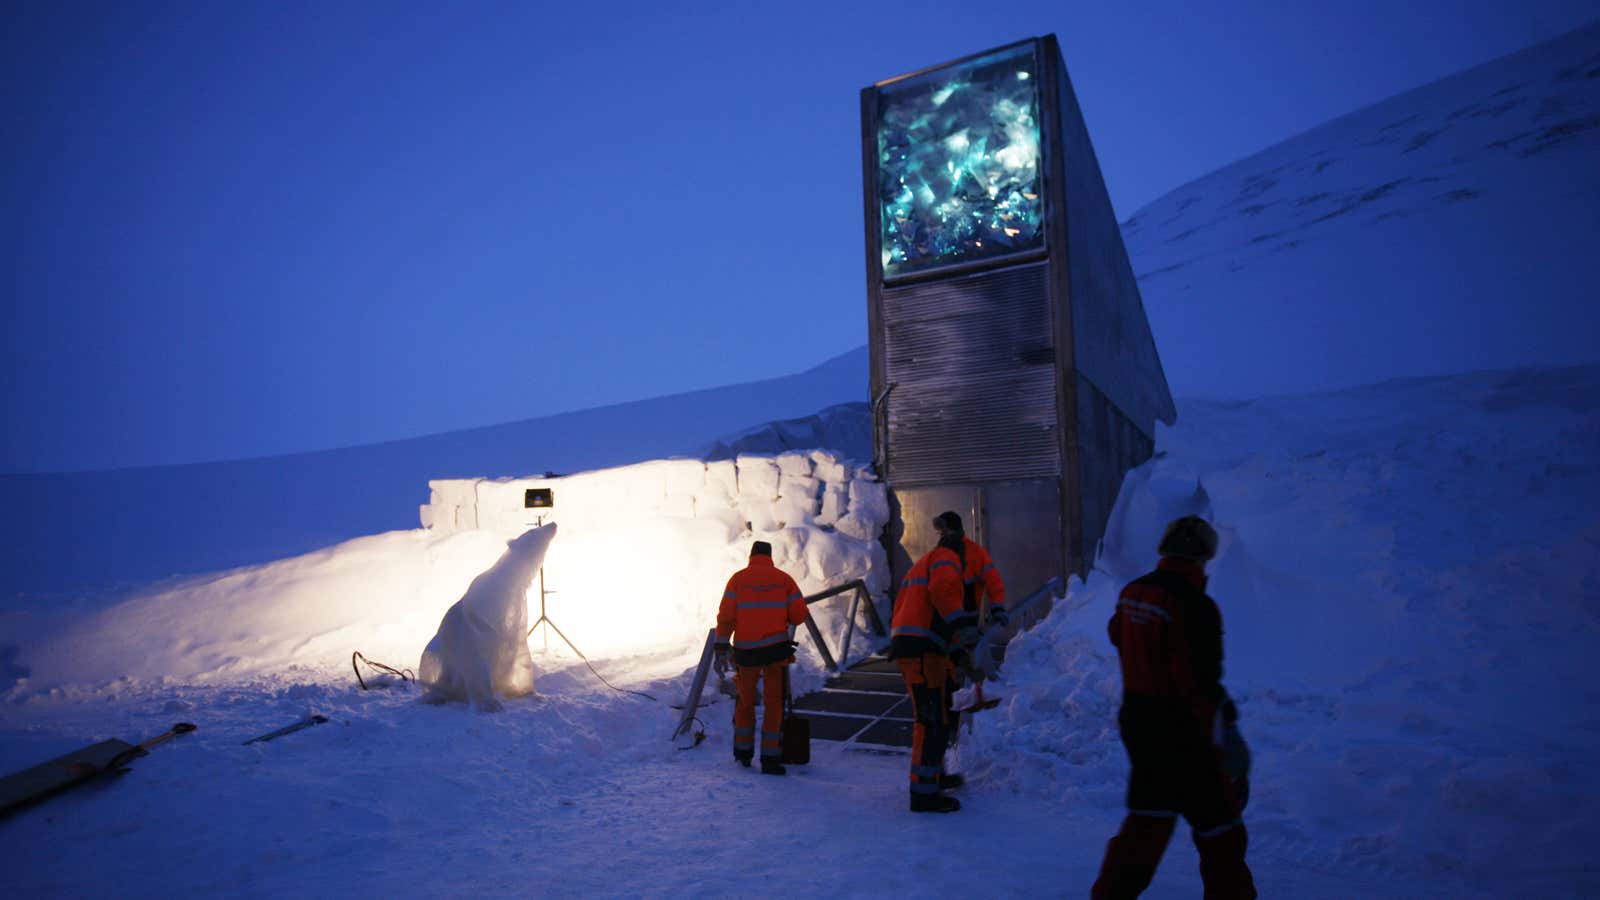 The Svalbard Global Seed Vault is meant to withstand nuclear fallout. It wasn’t expecting this.